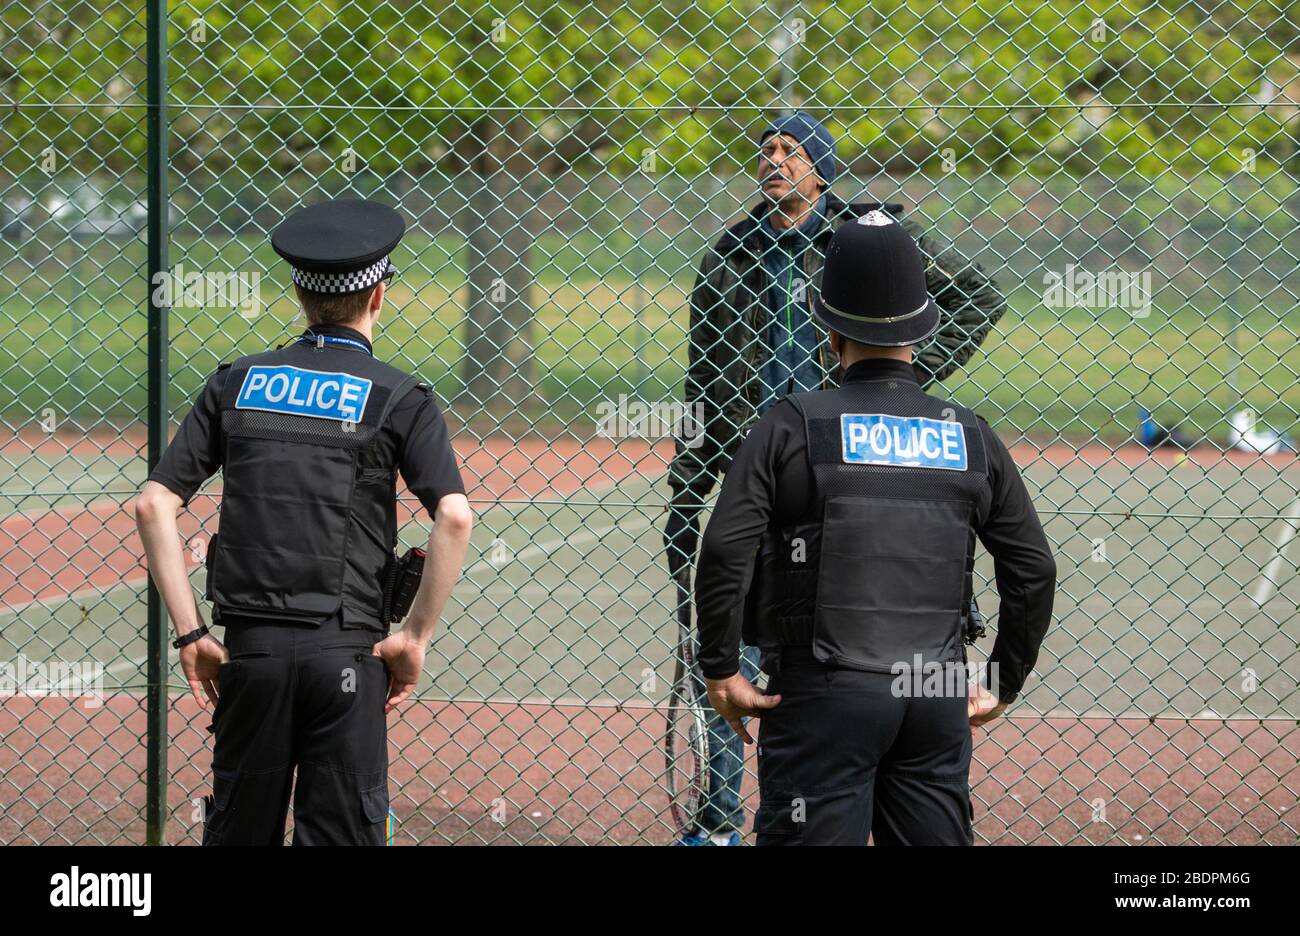 Police officers talk to a man playing tennis in Northampton, as Northants  Police announce they are toughening up their social distancing enforcement,  as the UK continues in lockdown to help curb the